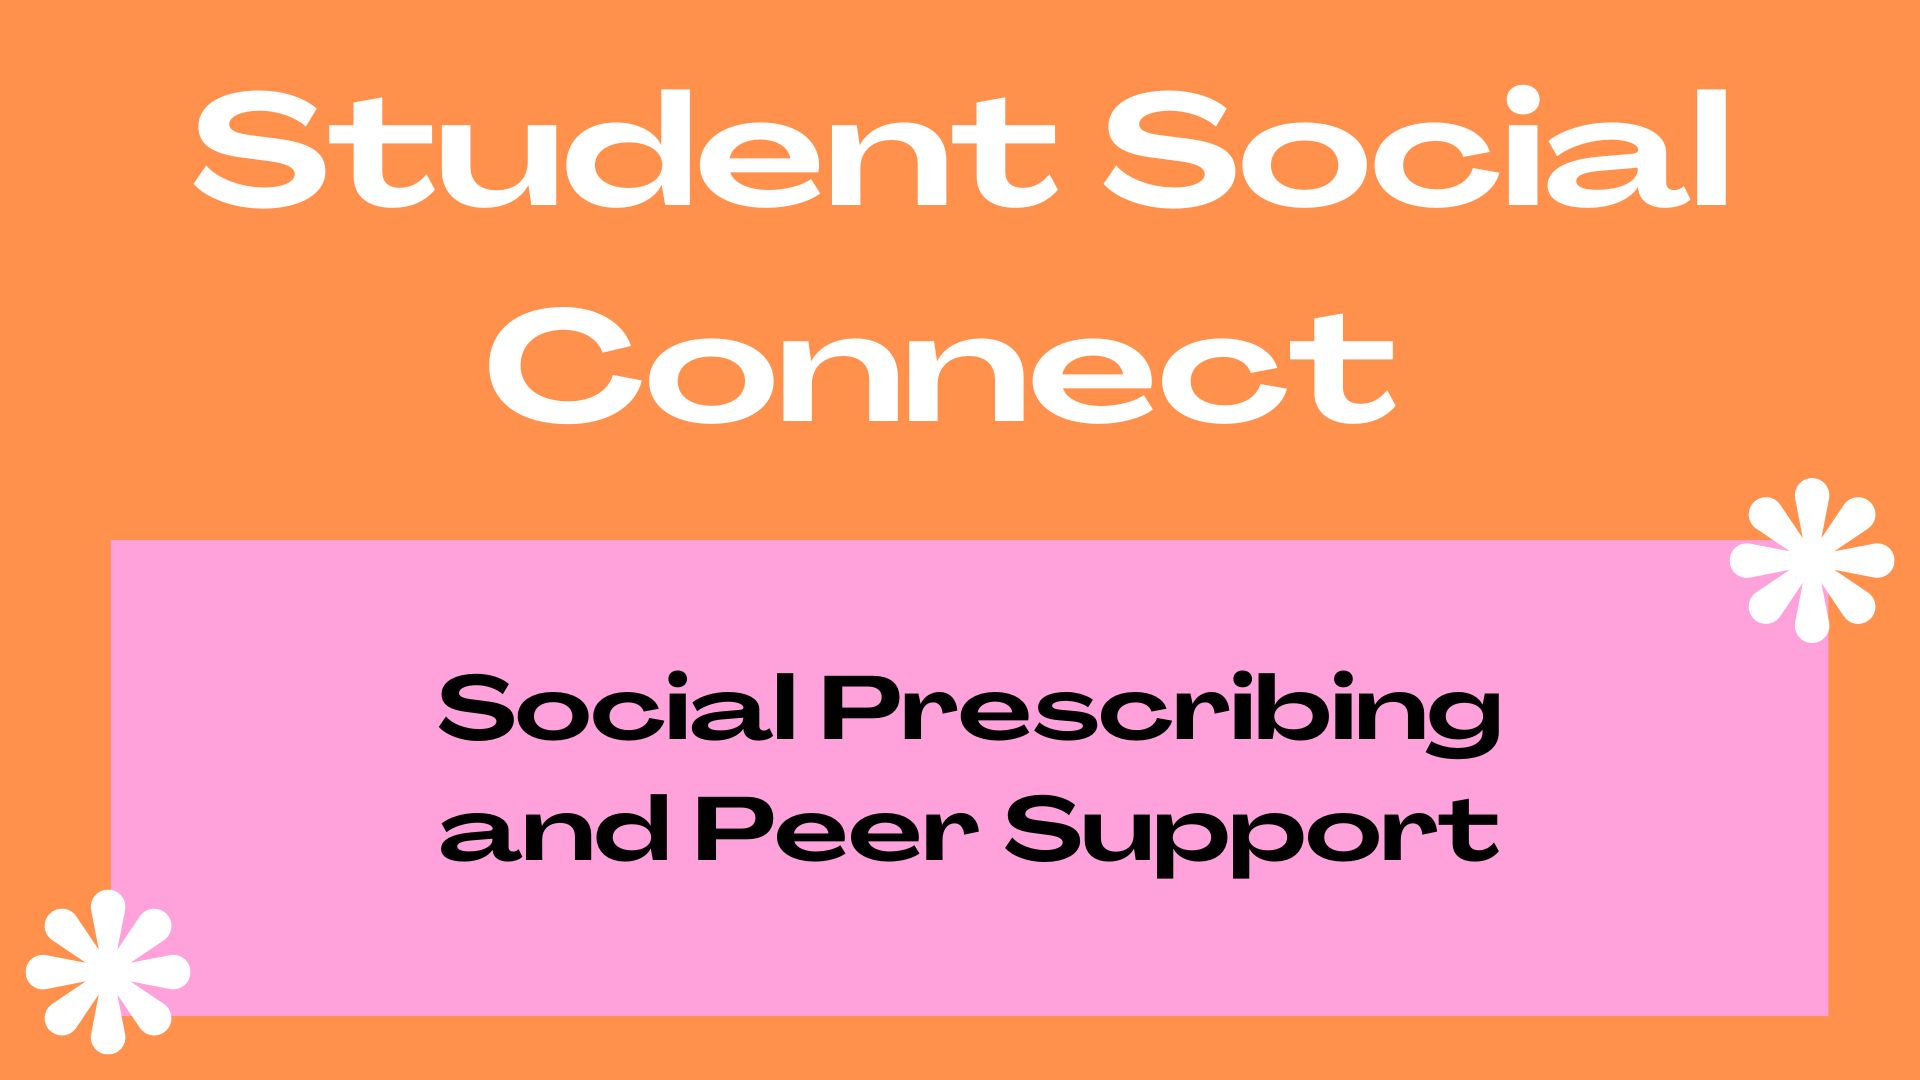 Student Social Connect Social Prescribing and Peer Support on a pink and orange background with white flowers